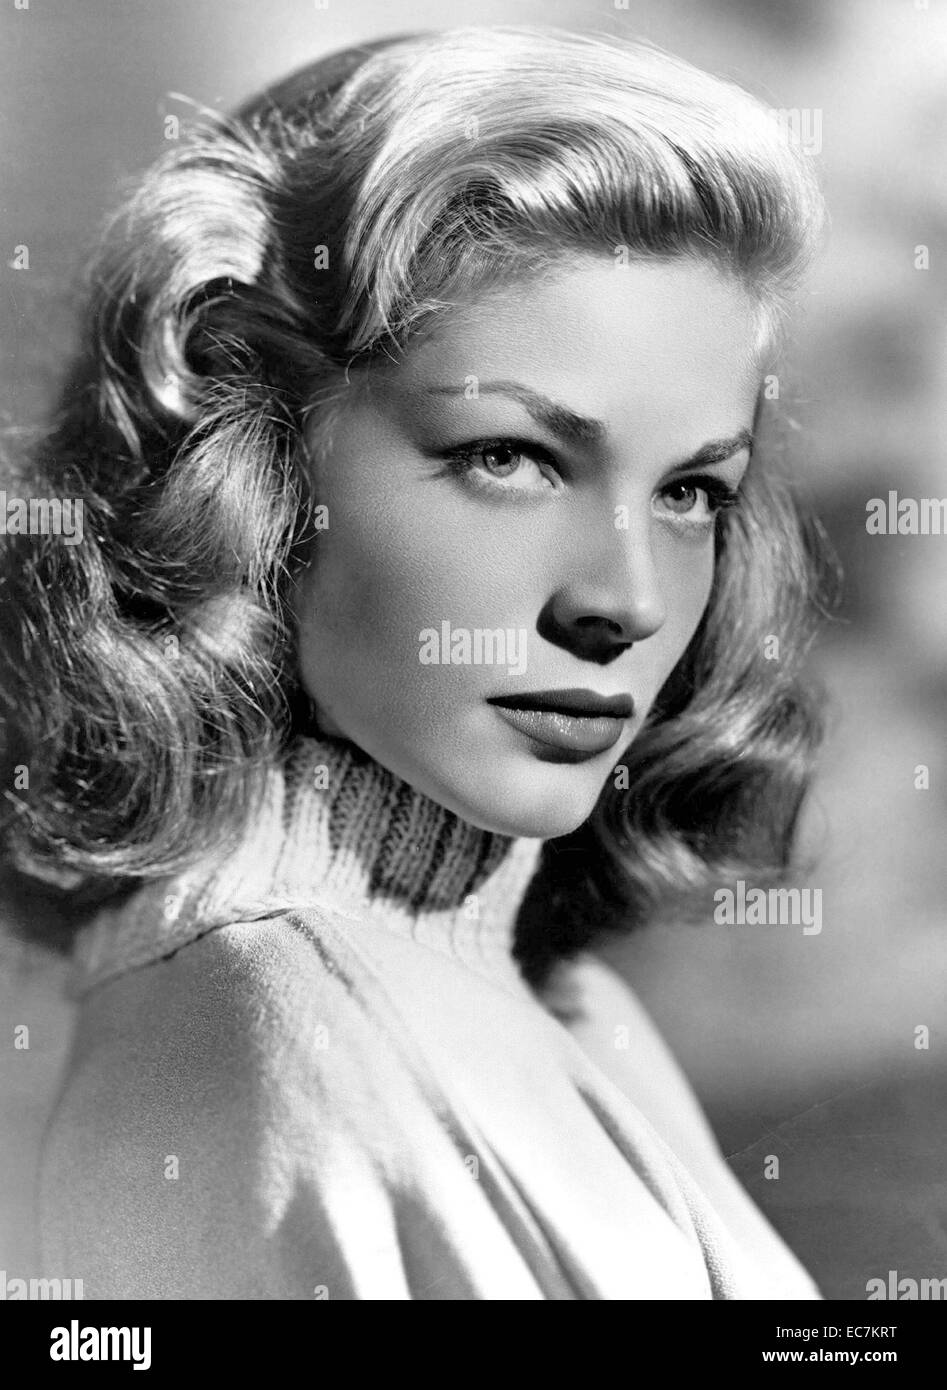 Lauren Bacall (1924 - ) American film and stage actress and model, known for her distinctive husky voice and sultry looks Stock Photo